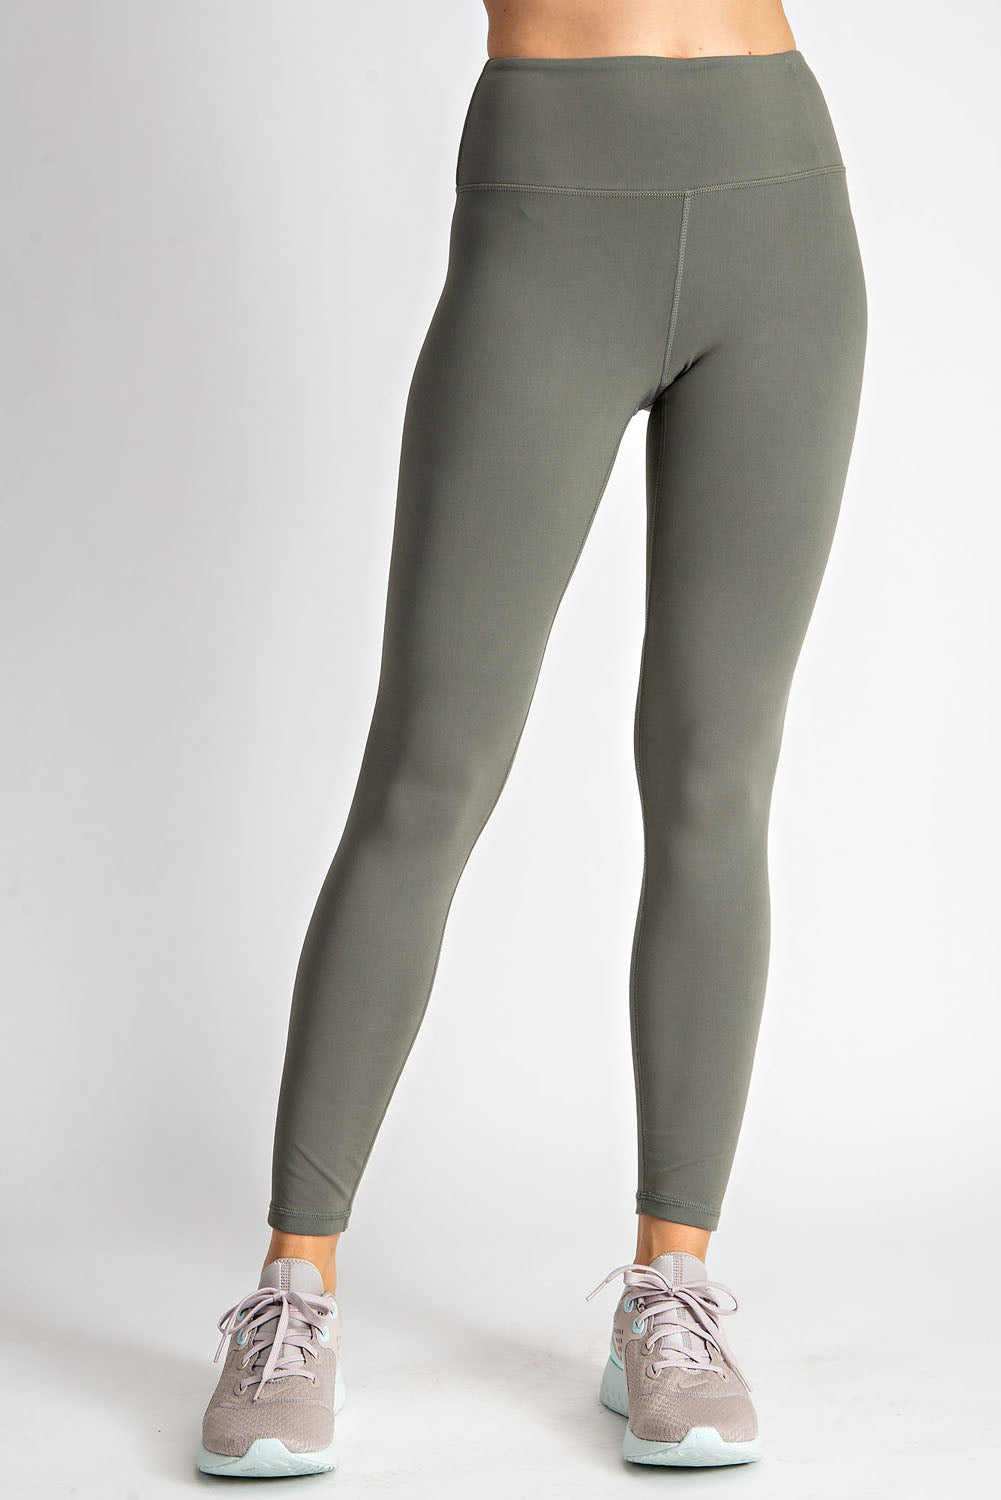 Boujee Babe Butter Soft 3 Piece Legging Set (Sage Green) - FINAL SALE – Eb  and Flo